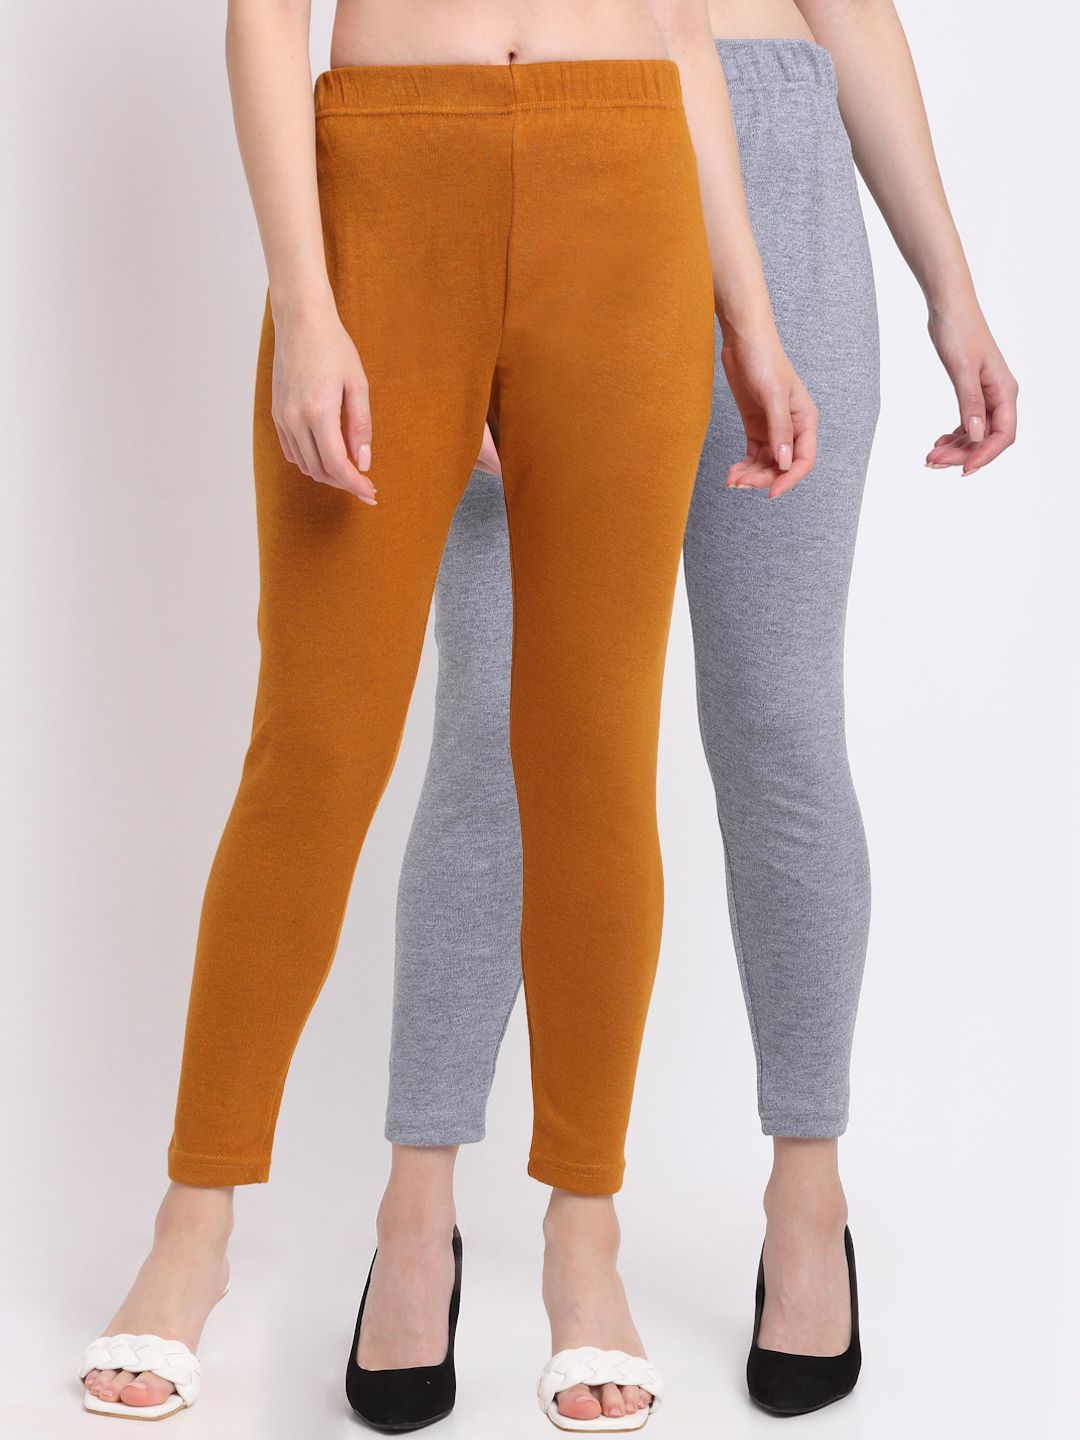 TAG 7 Women Set Of 2 Solid Ankle-Length Leggings Price in India